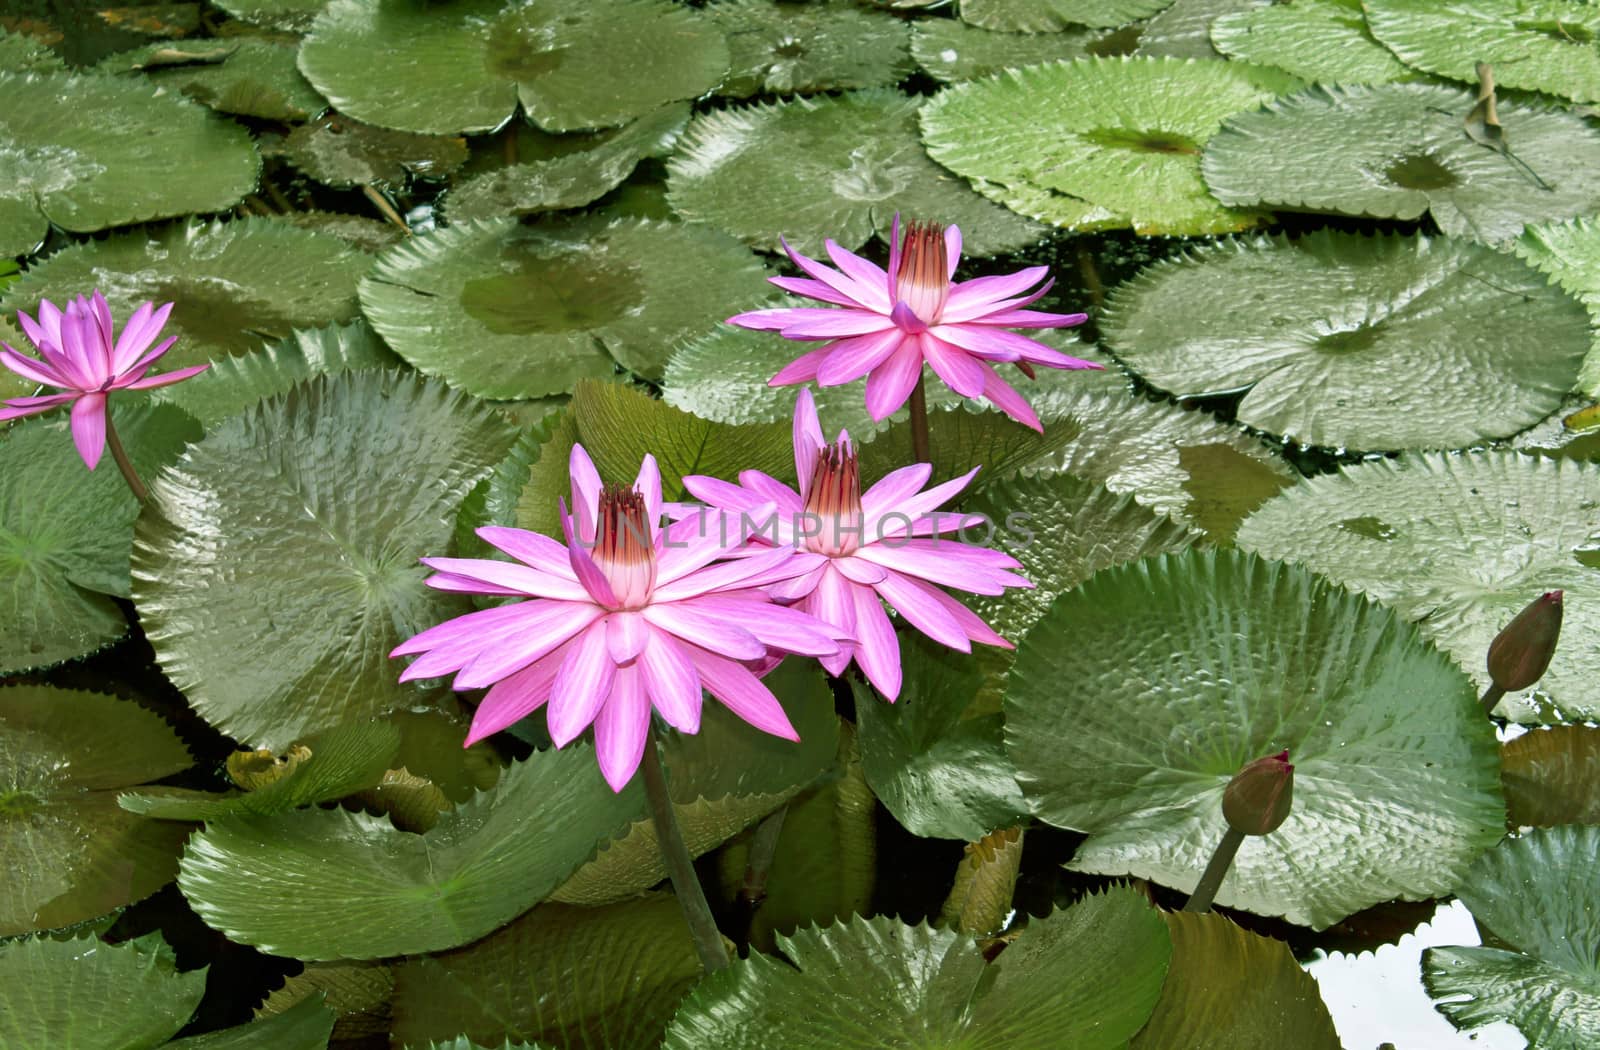 Image of a Lotus Flower On The Water